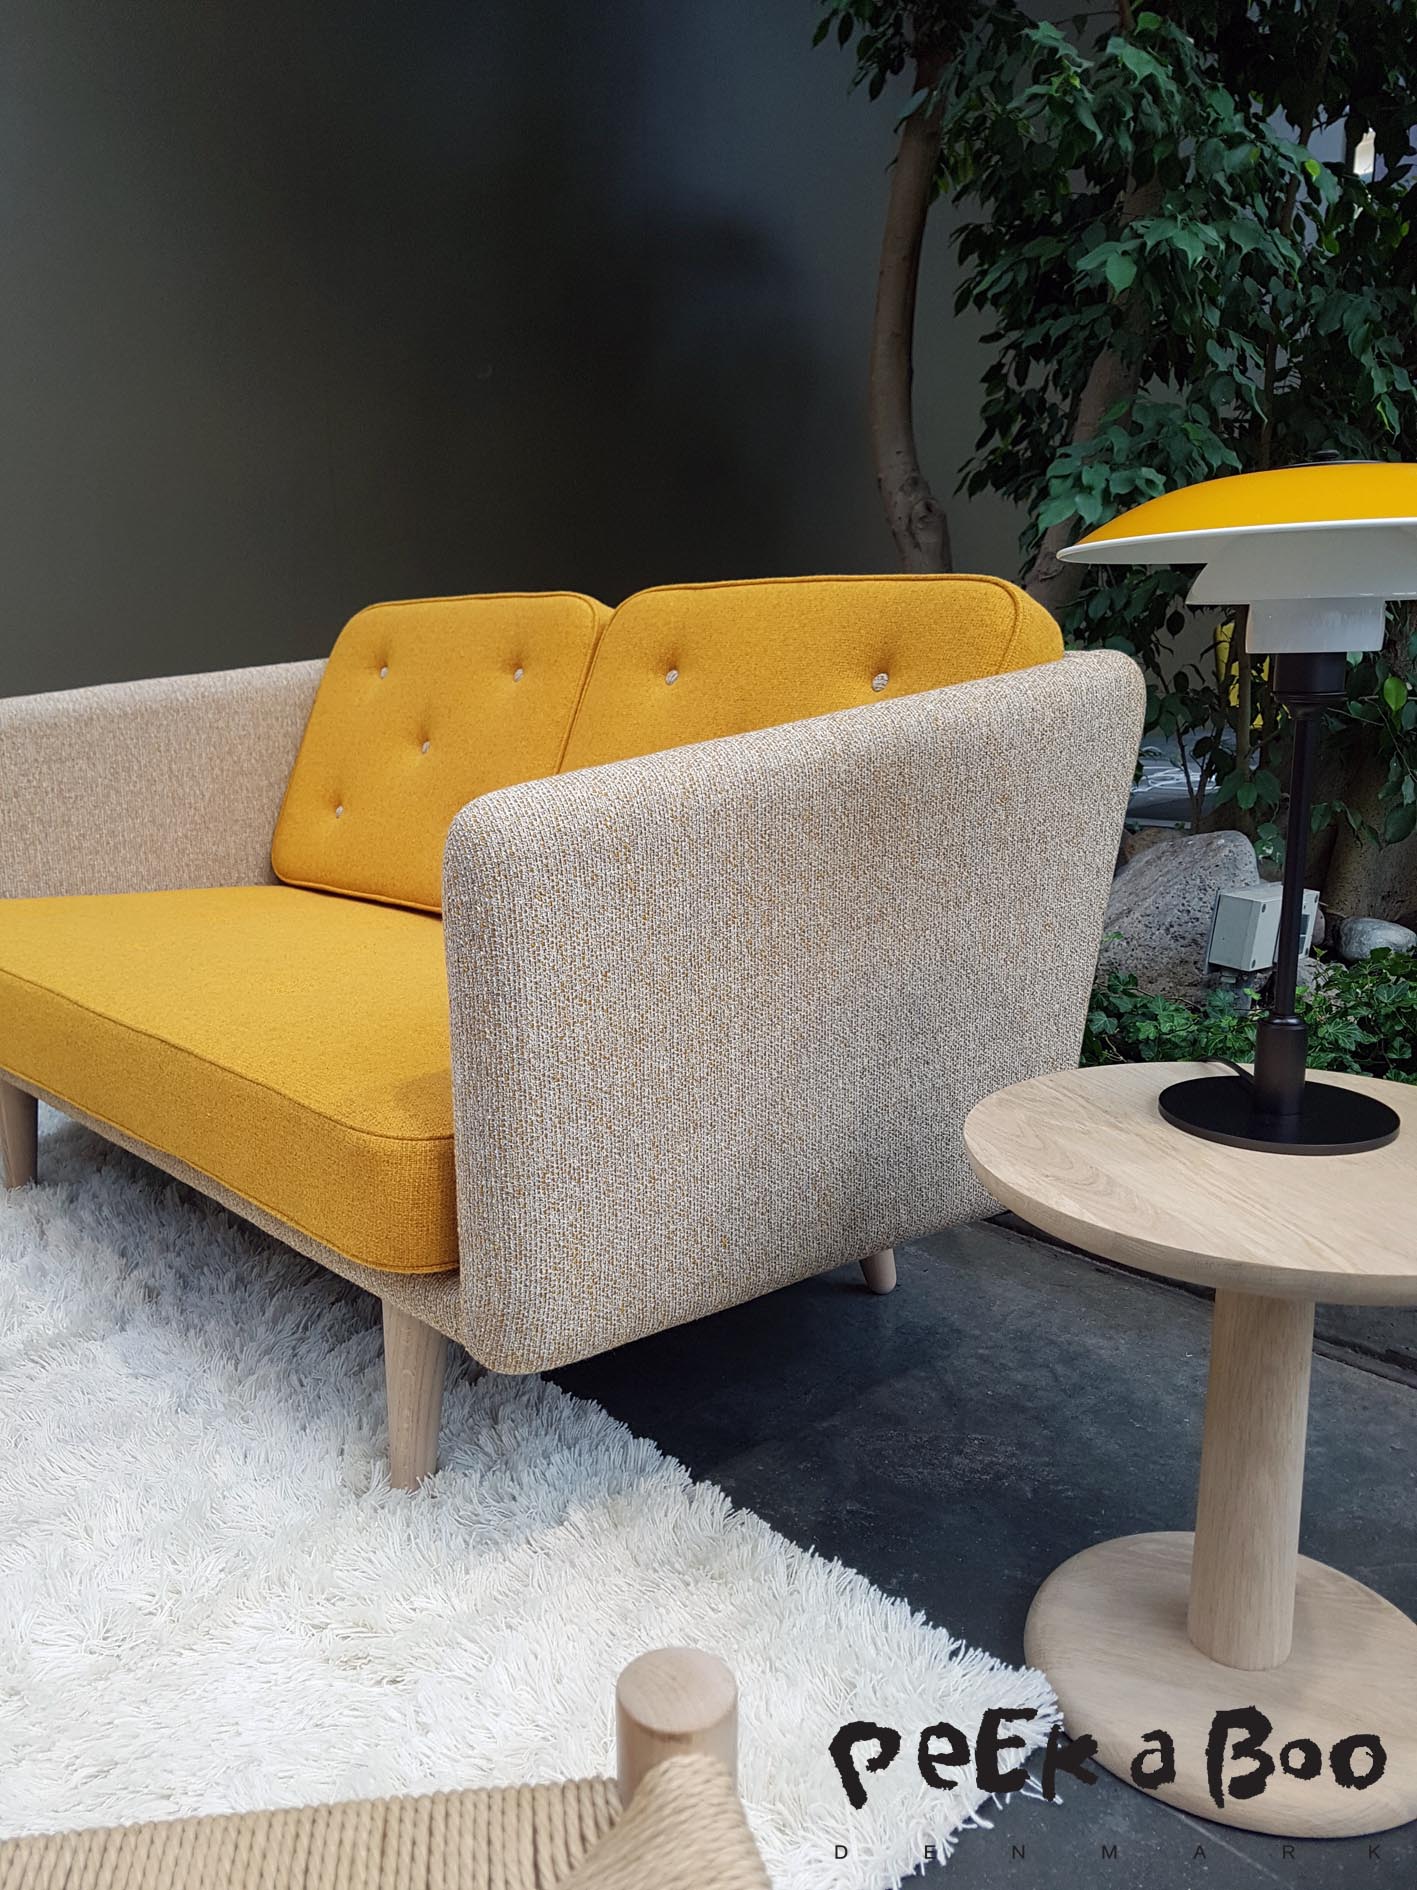 Fredericia Funiture did a sofa in a combi of yellow and a light beige, which made it look fresh. I like the colour combi very much.